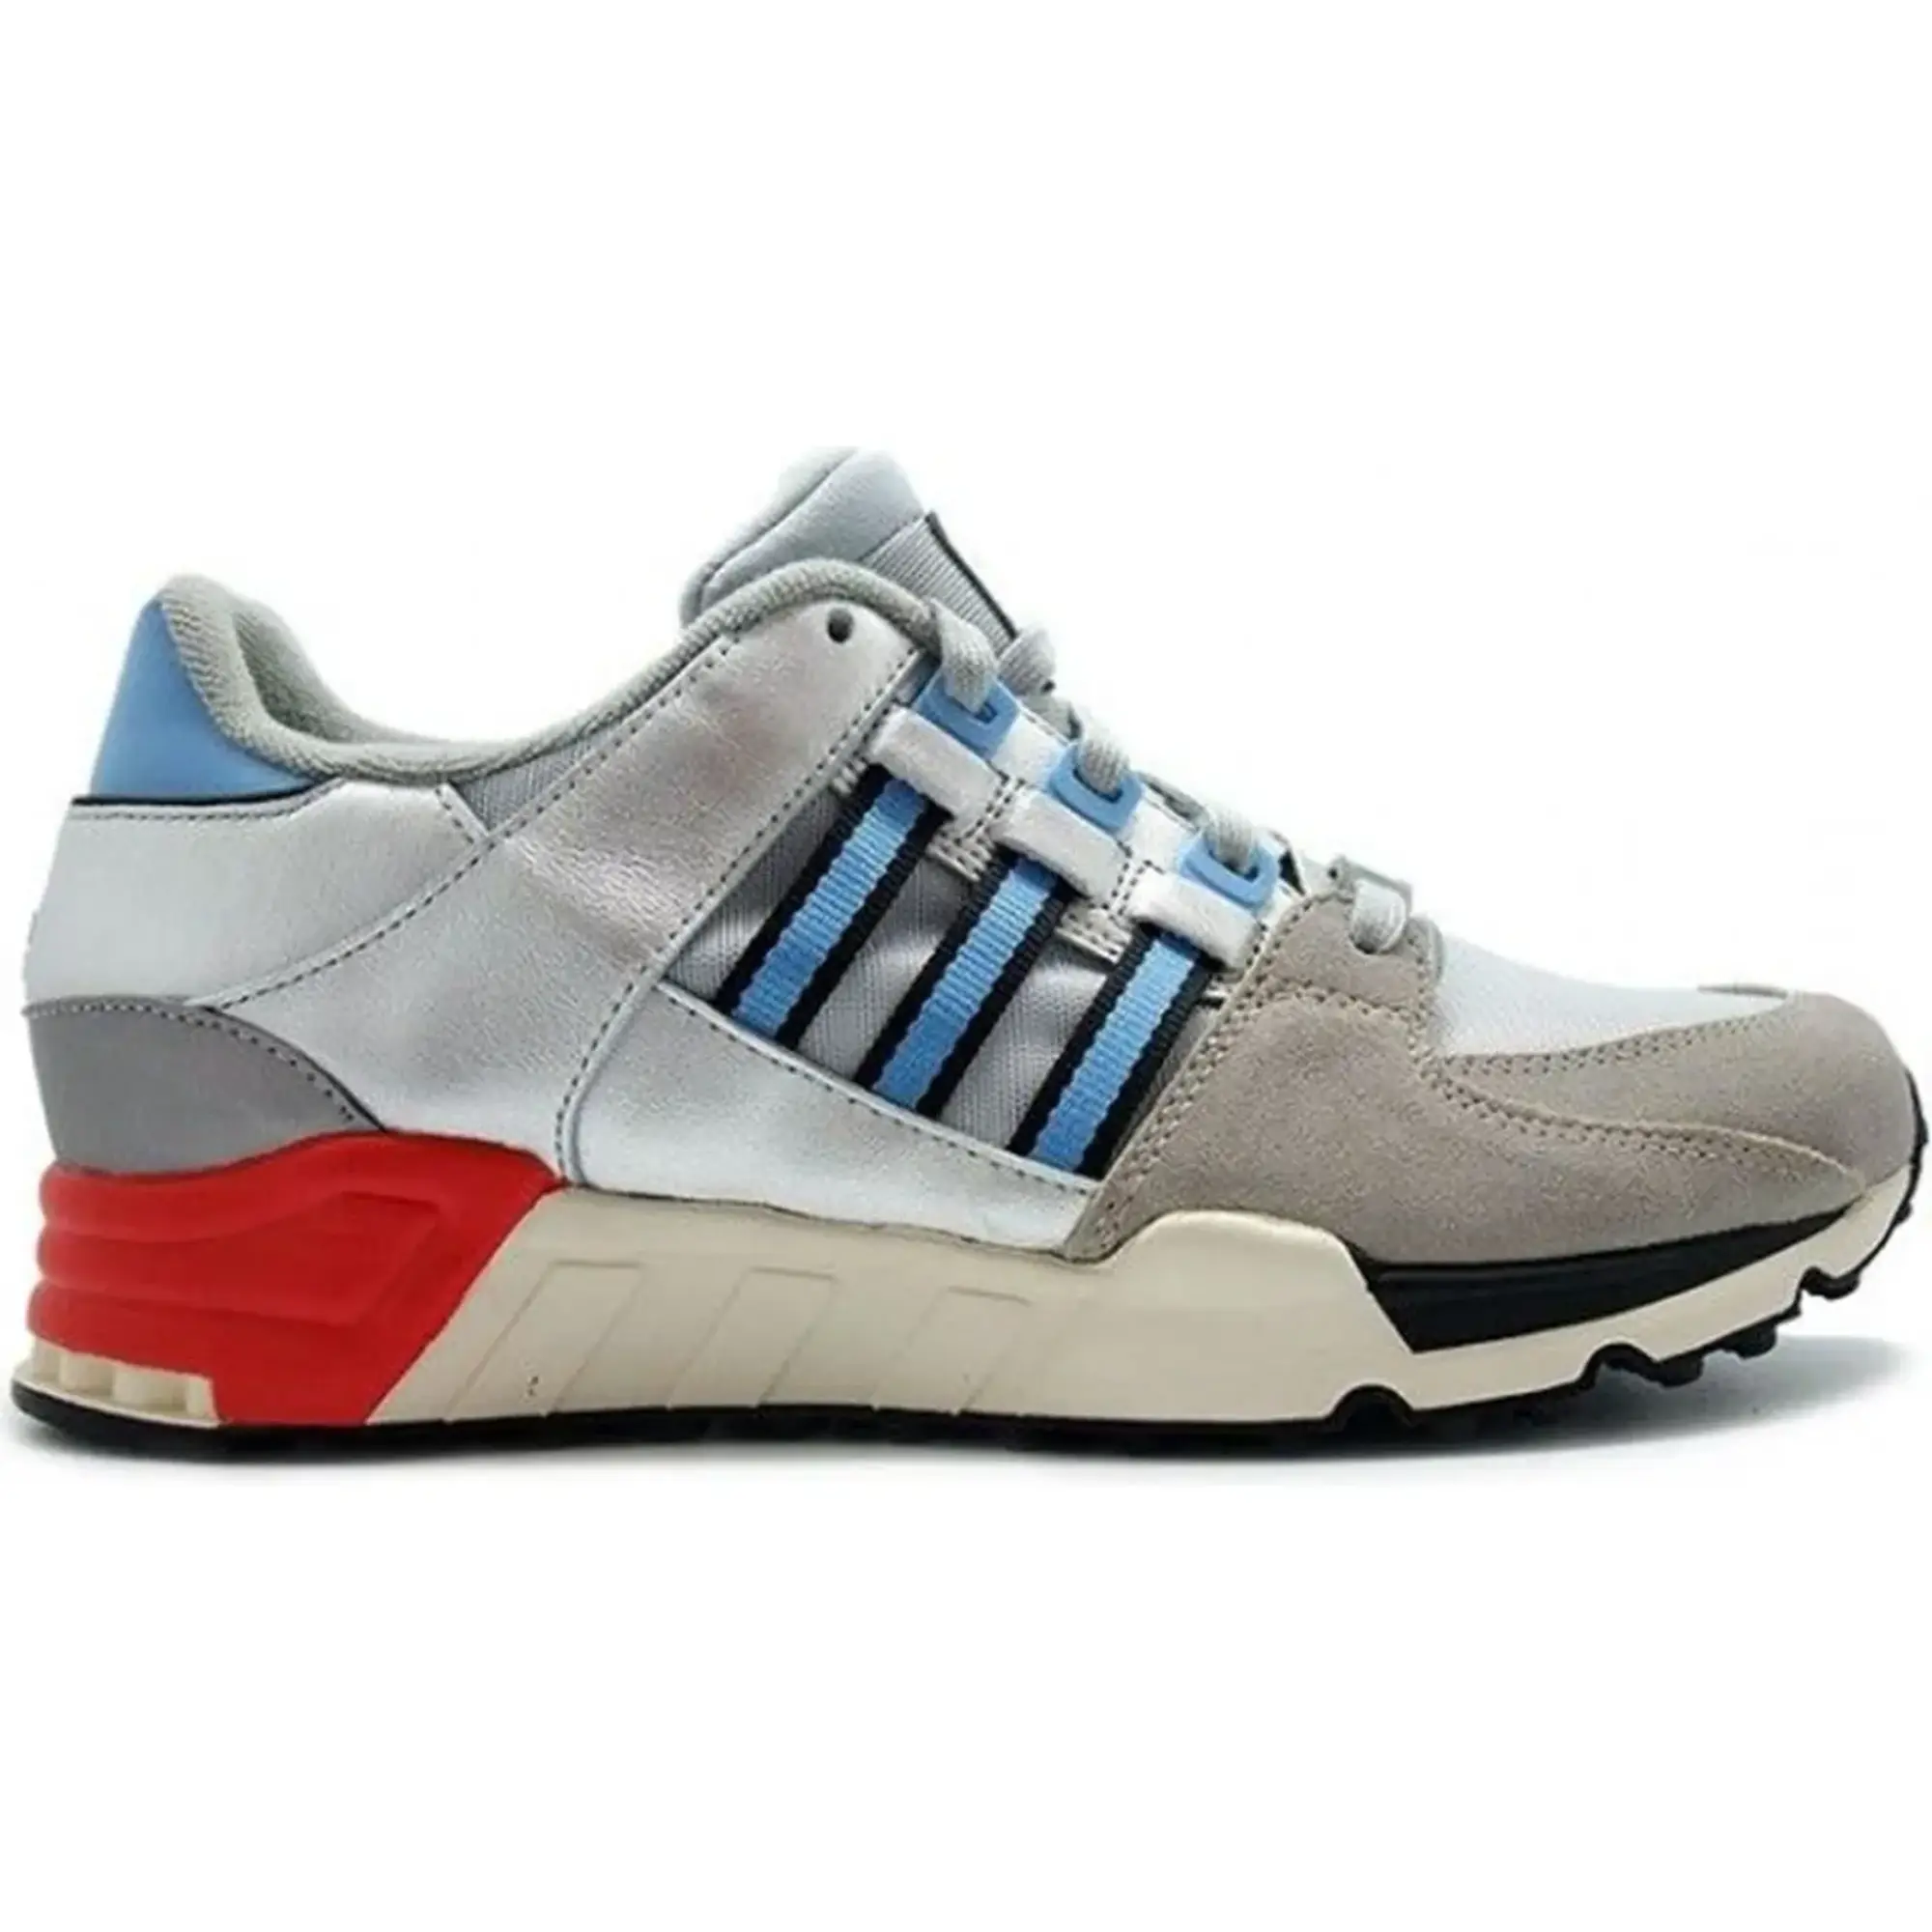 adidas EQT Running Support 93 Packer Shoes Micropacer